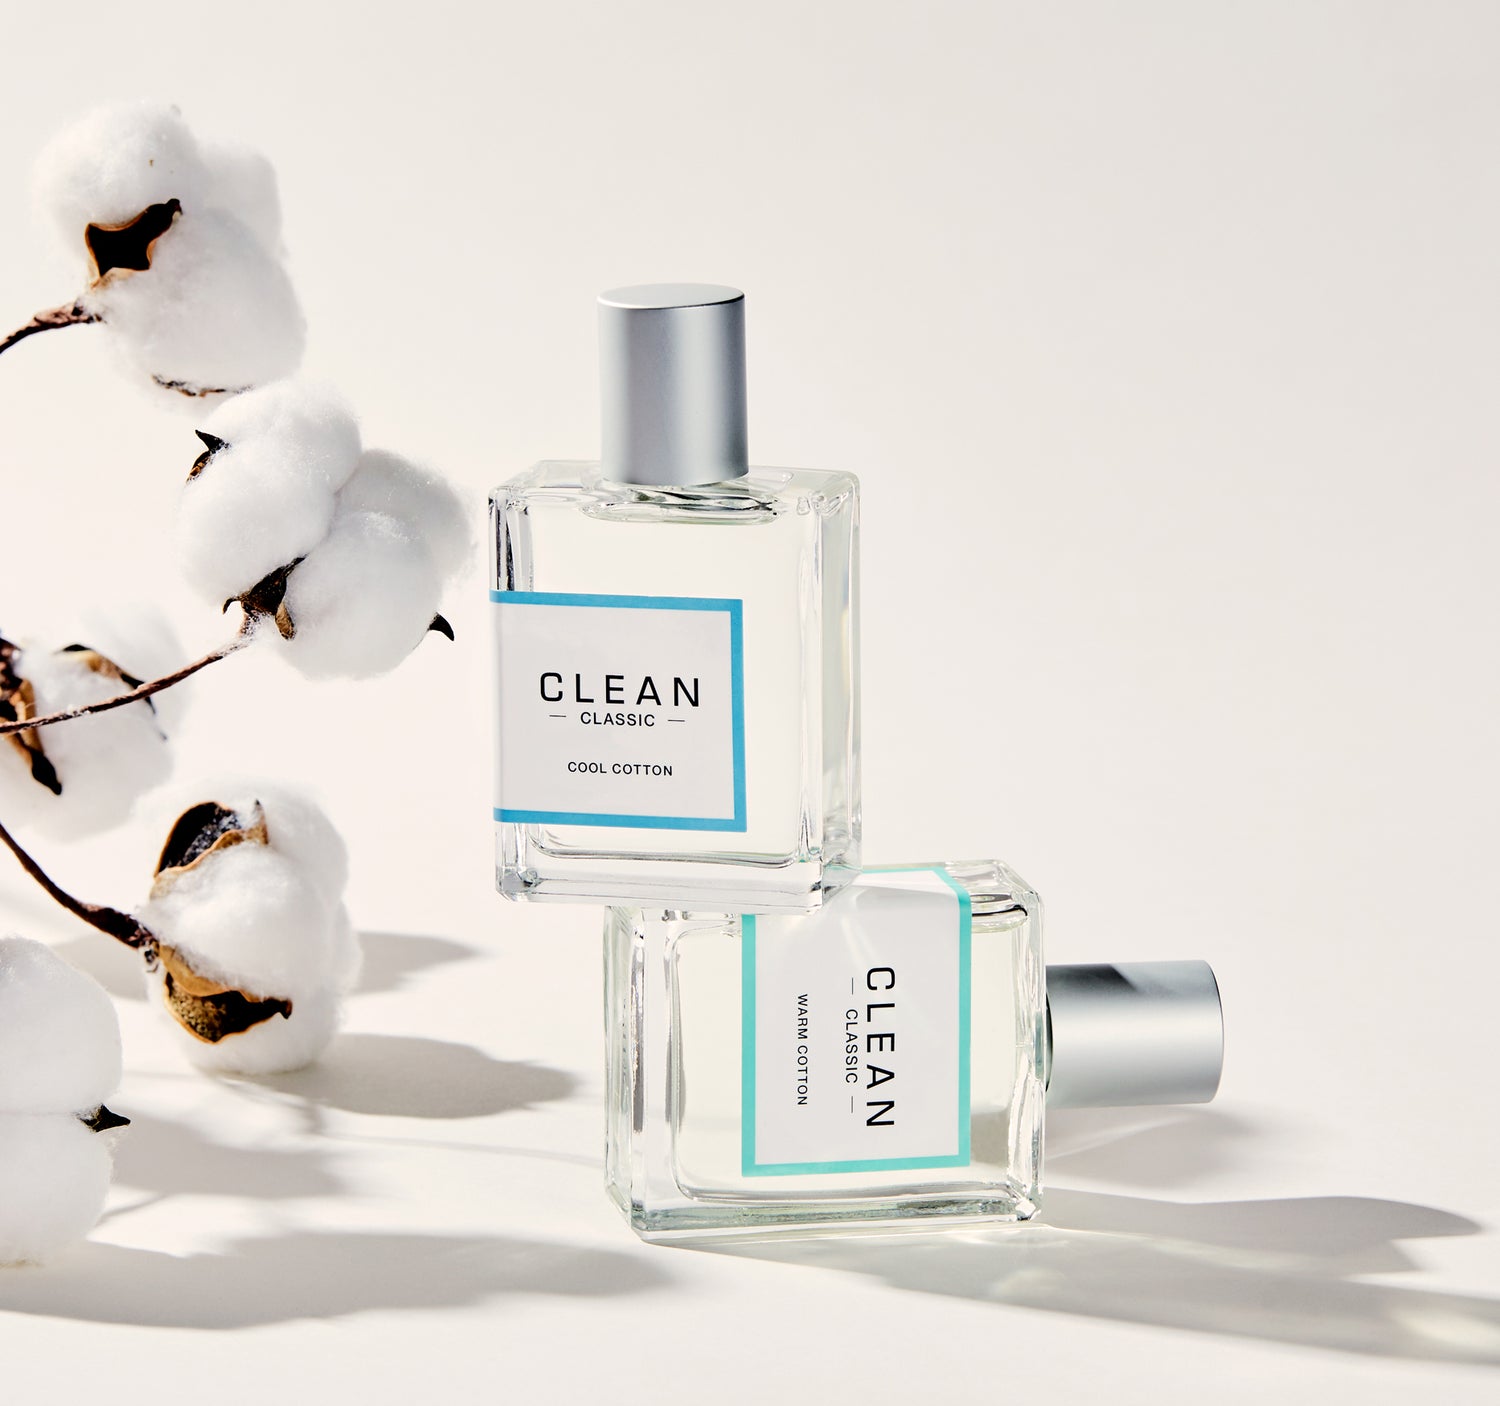 CLEAN CLASSIC - Clean Perfumes  Clean Beauty Collective – CLEAN